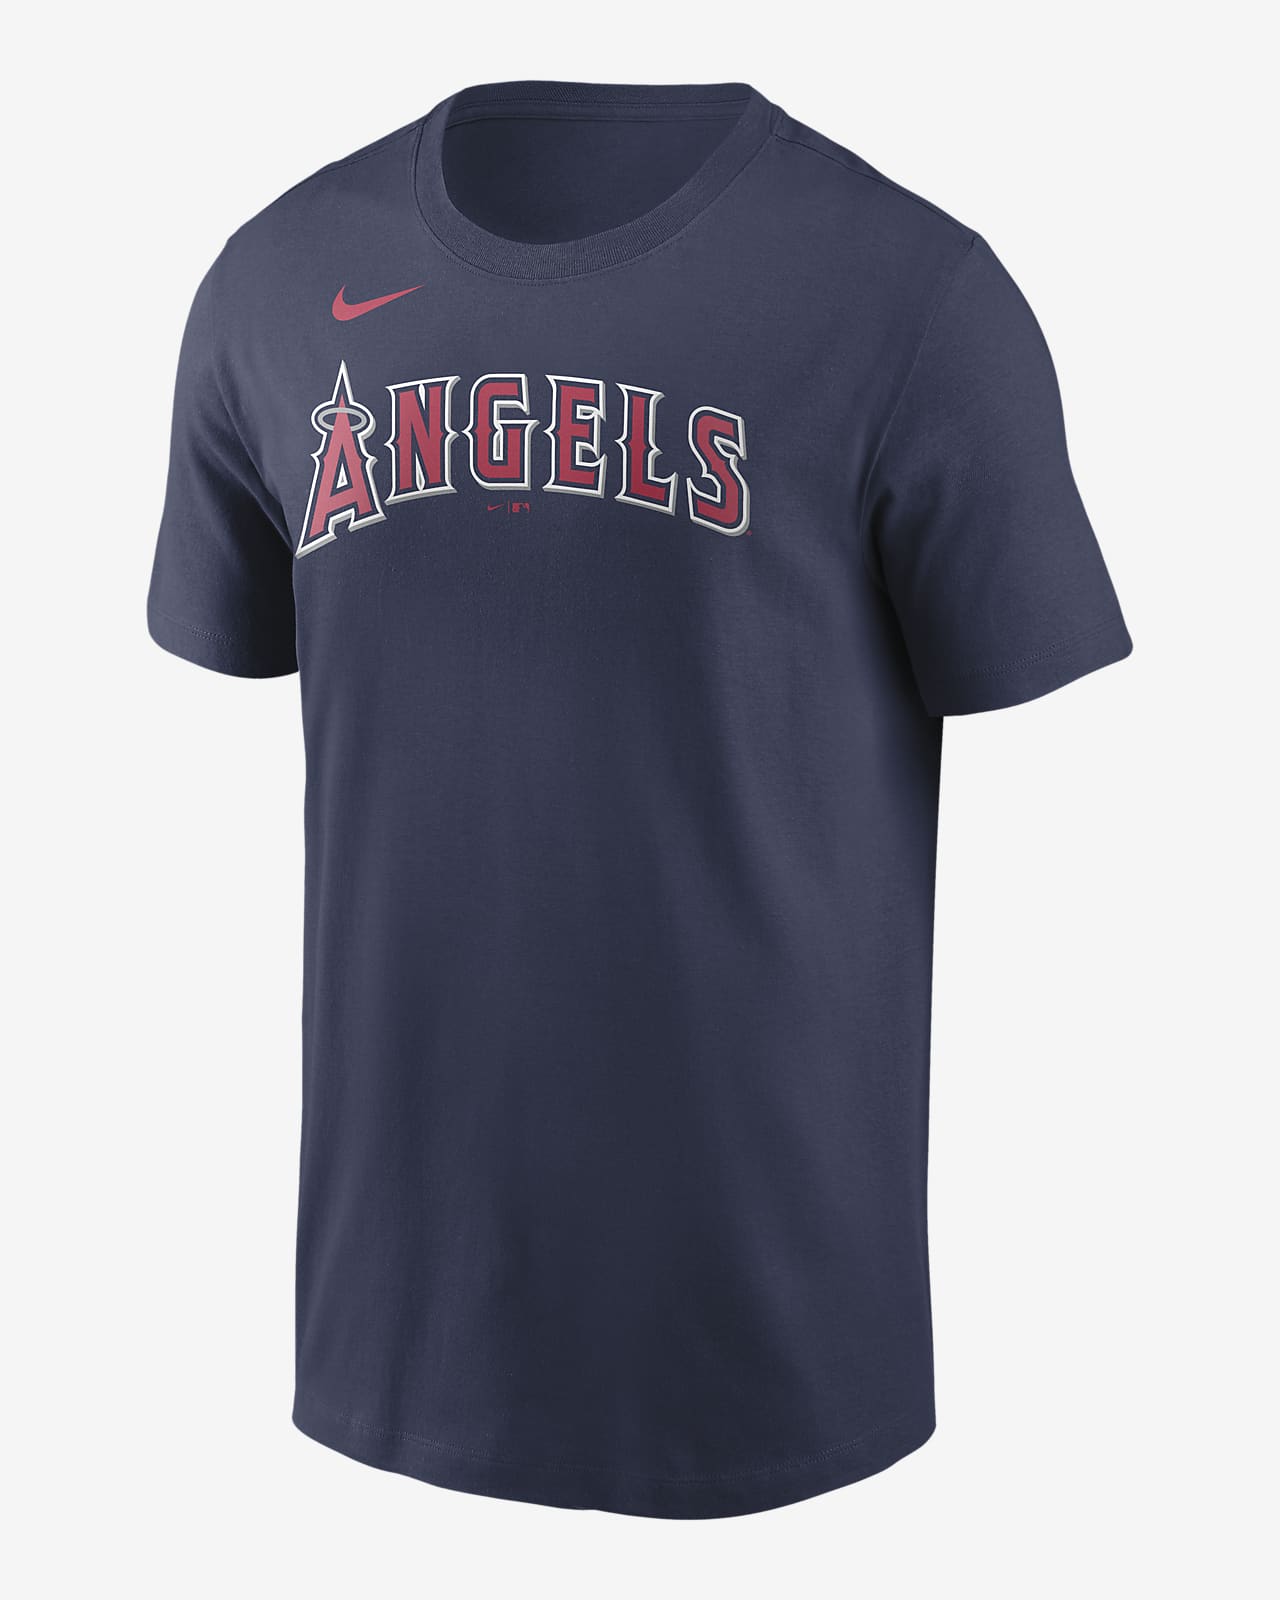 angels jerseys for sale